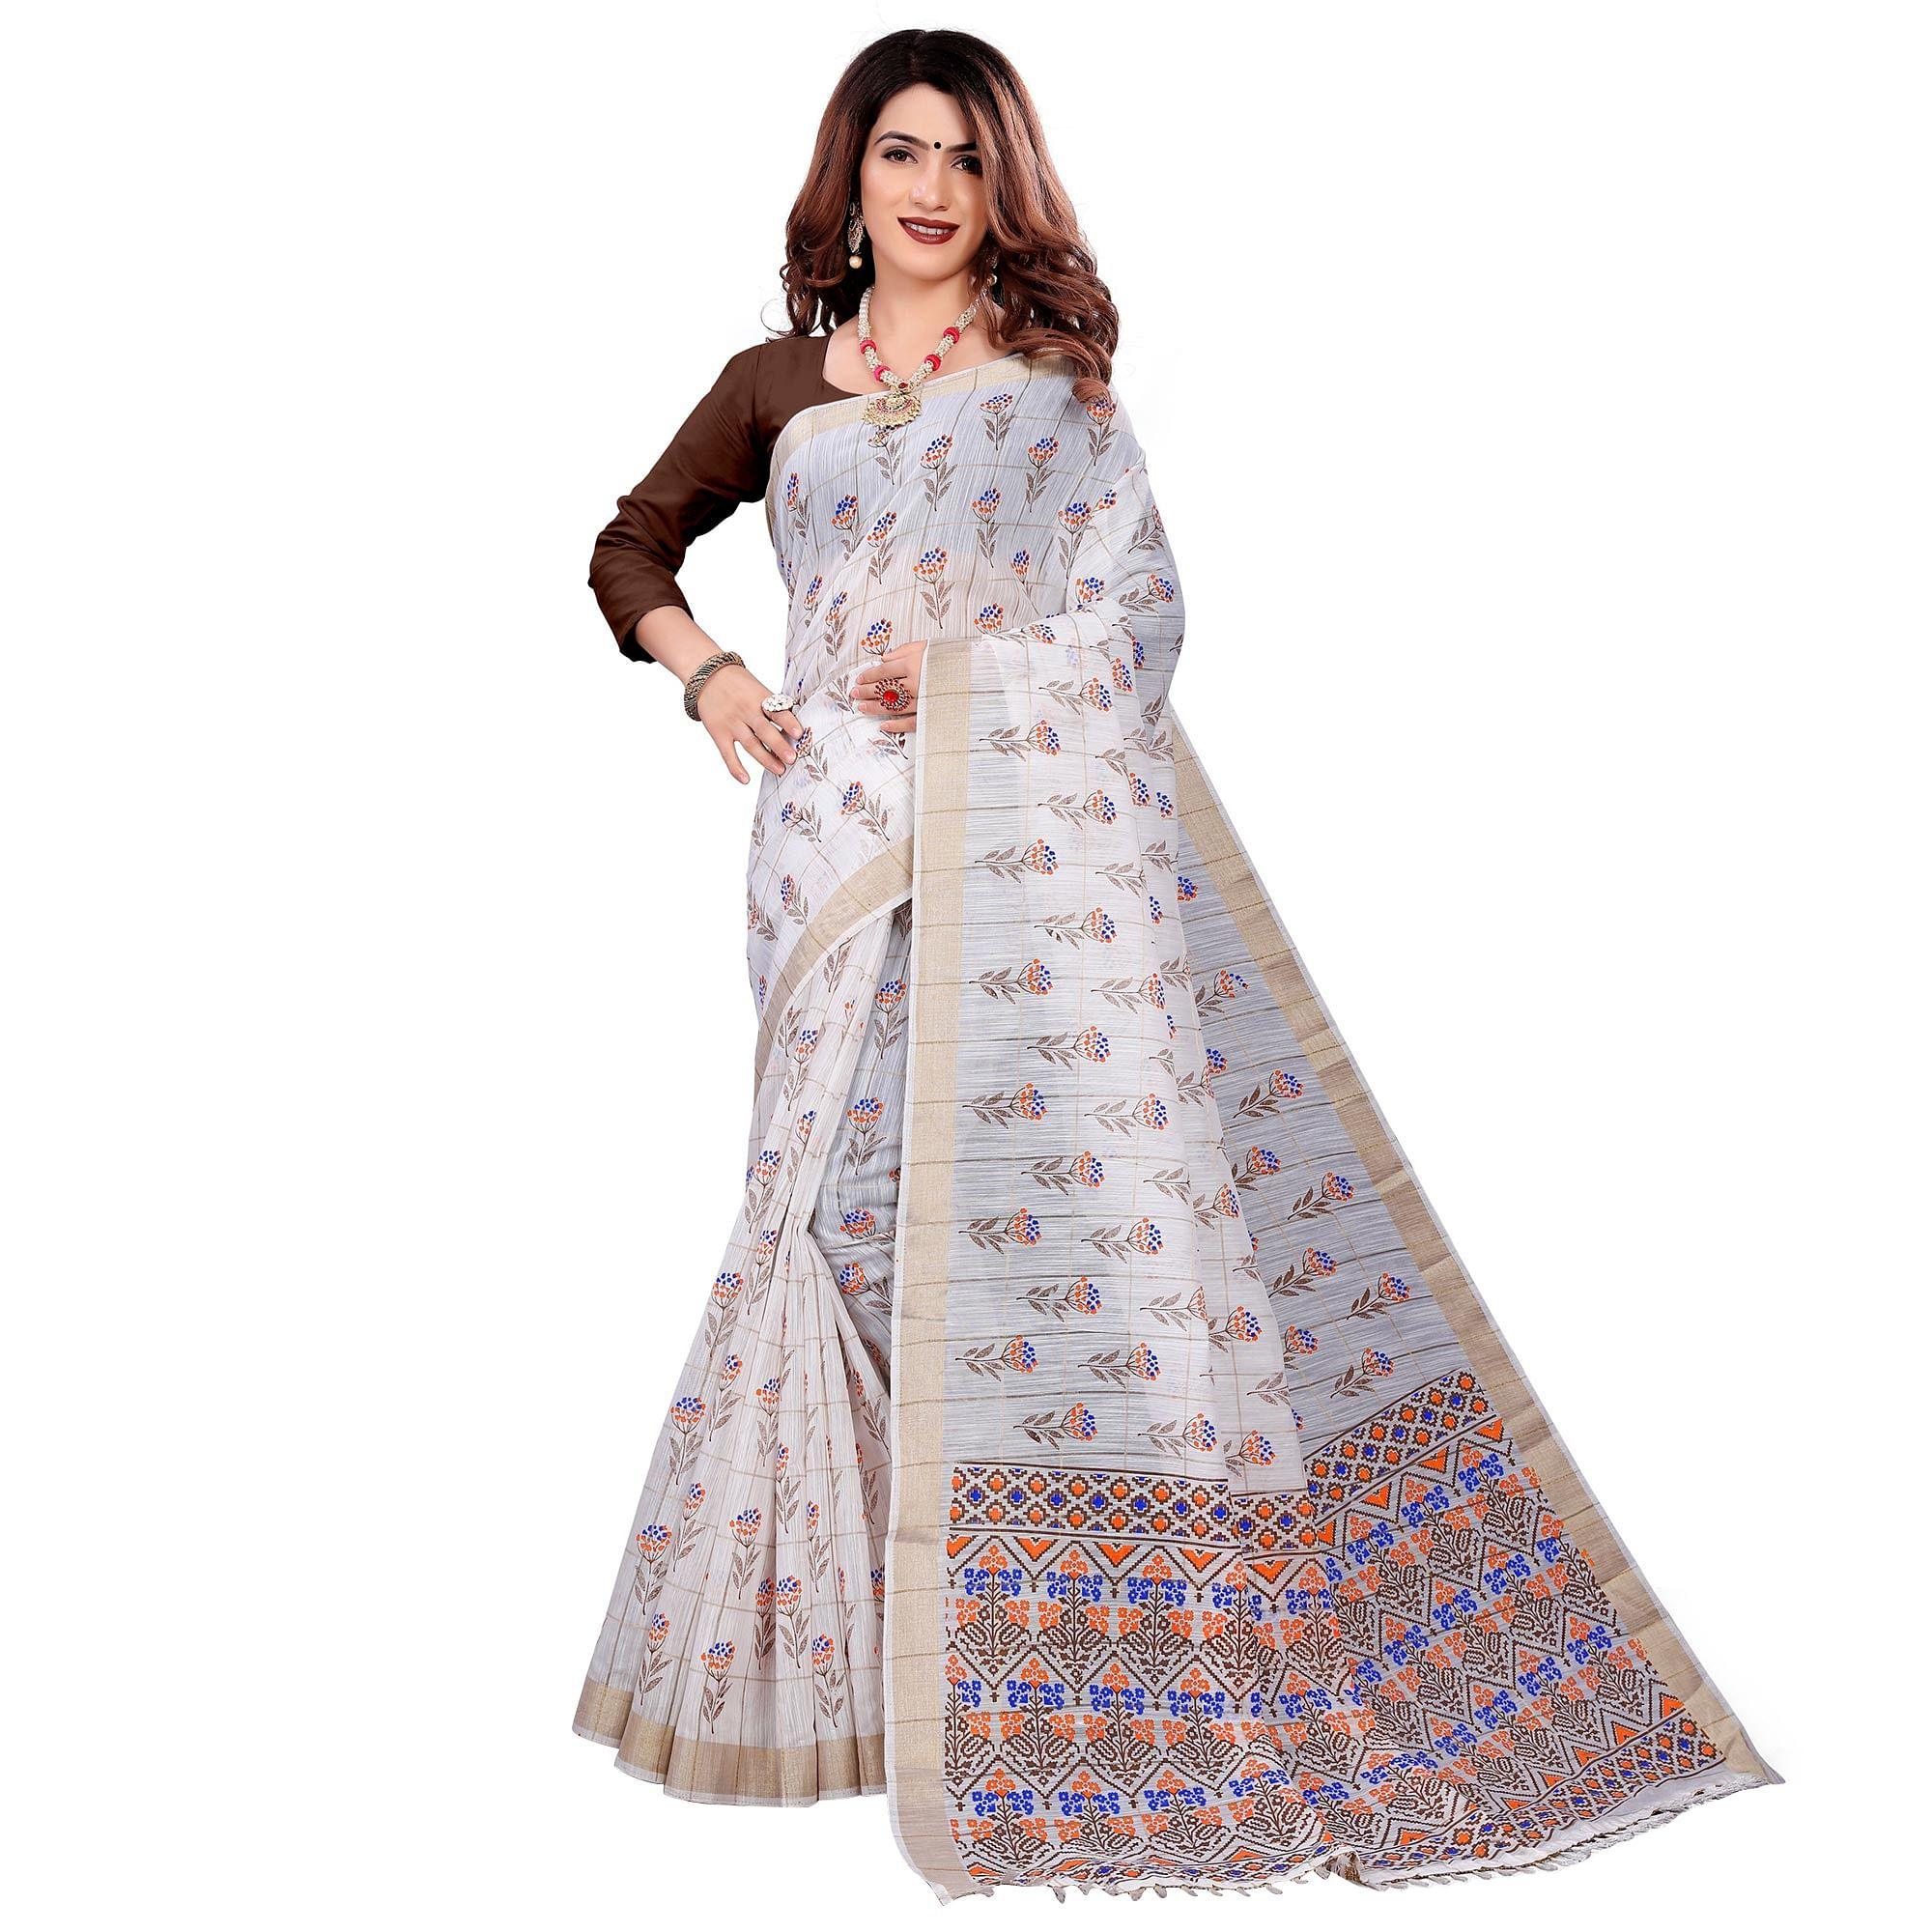 Trendy White Colored Casual Wear Printed Cotton Saree With Tassels - Peachmode